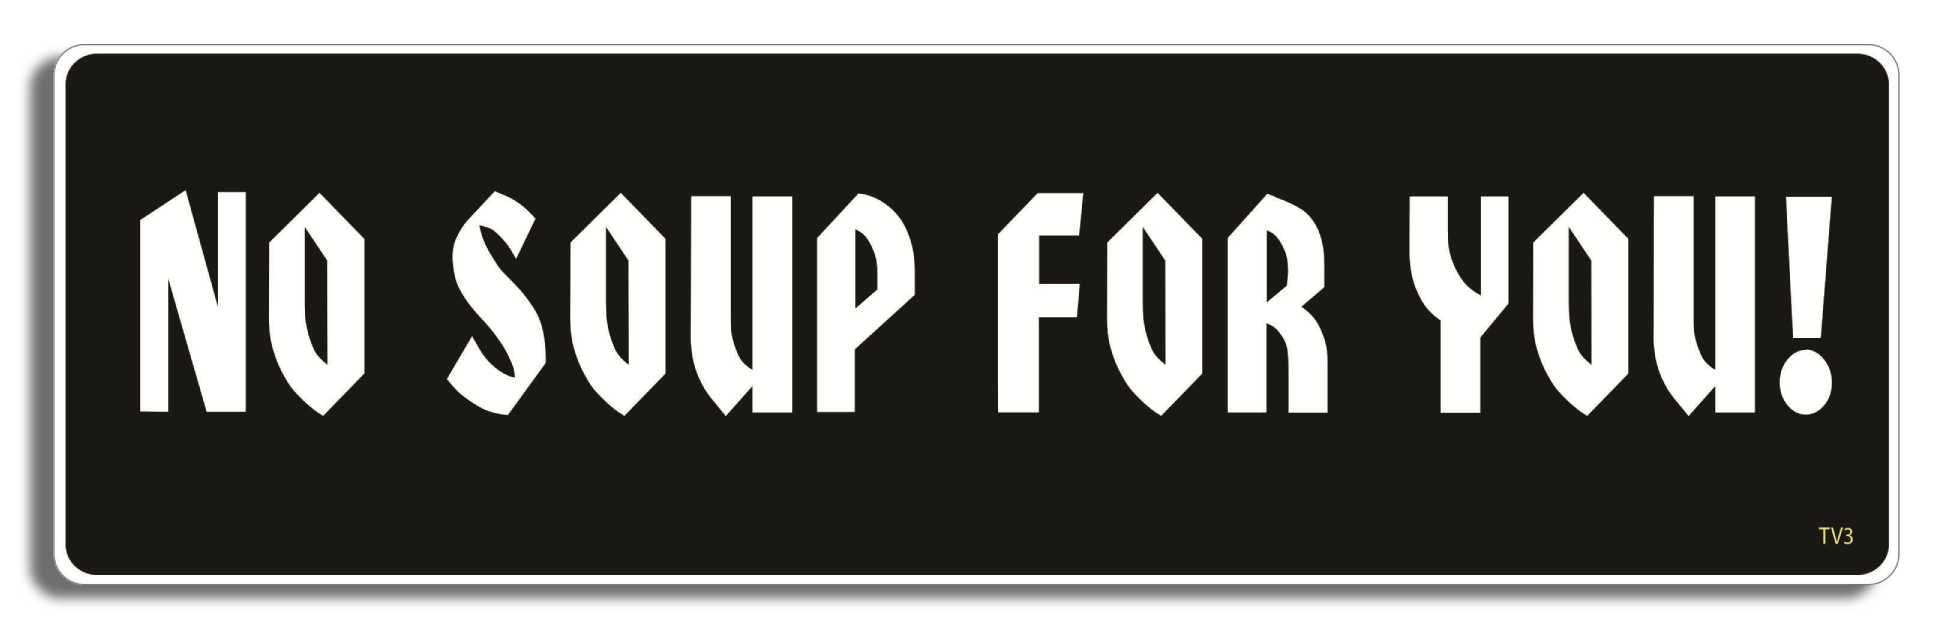 No soup for you - 3" x 10" -  Decal Bumper Sticker-seinfeld Bumper Sticker Car Magnet No soup for you-  Decal for carsseinfeld